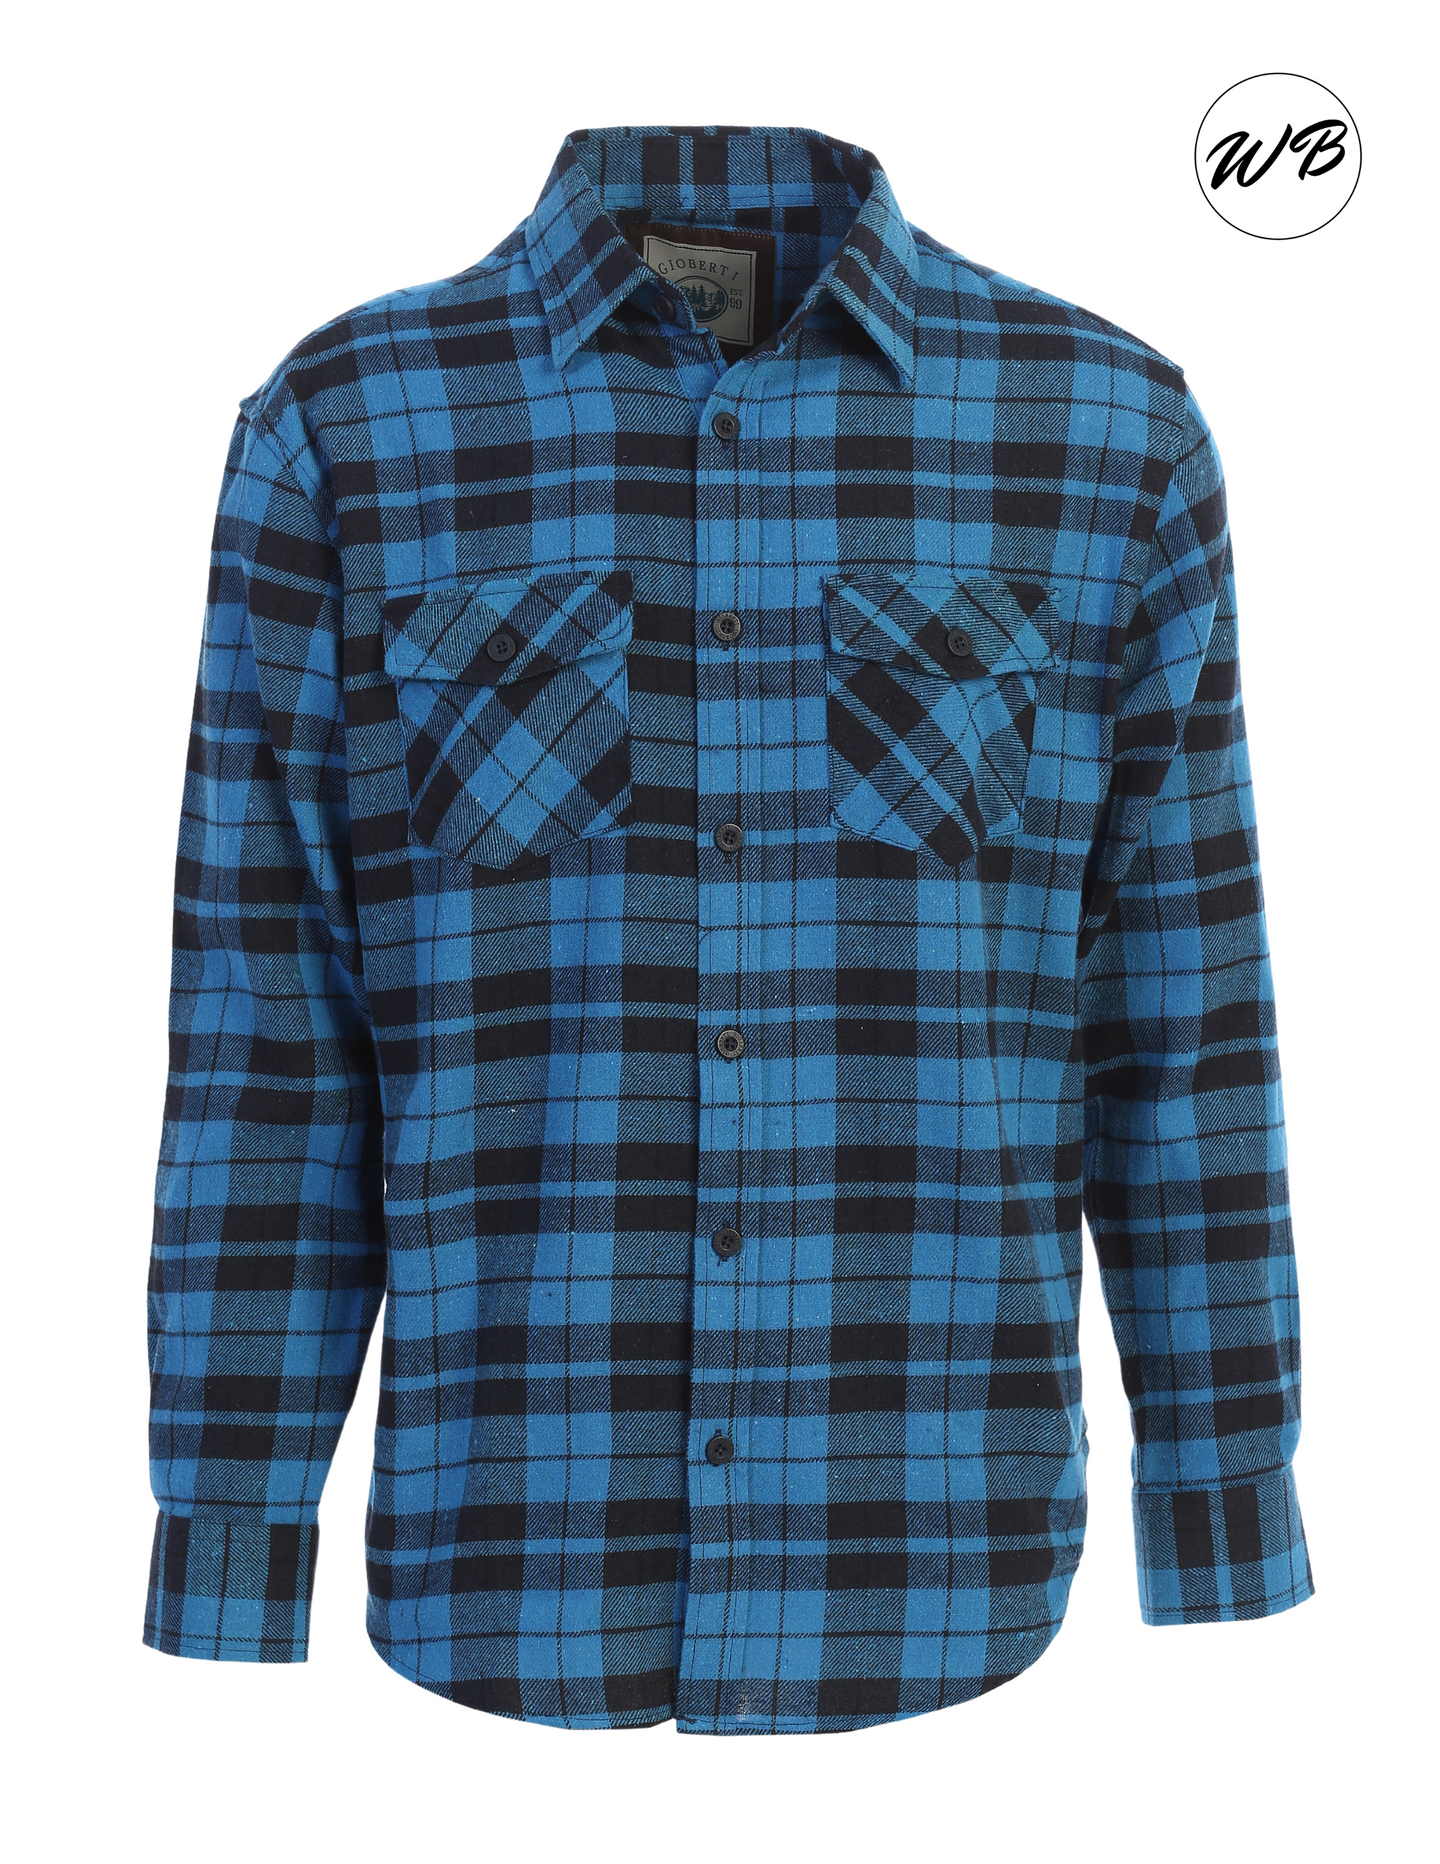 Men's Plaid Casual Flannel Shirts Long Sleeve.